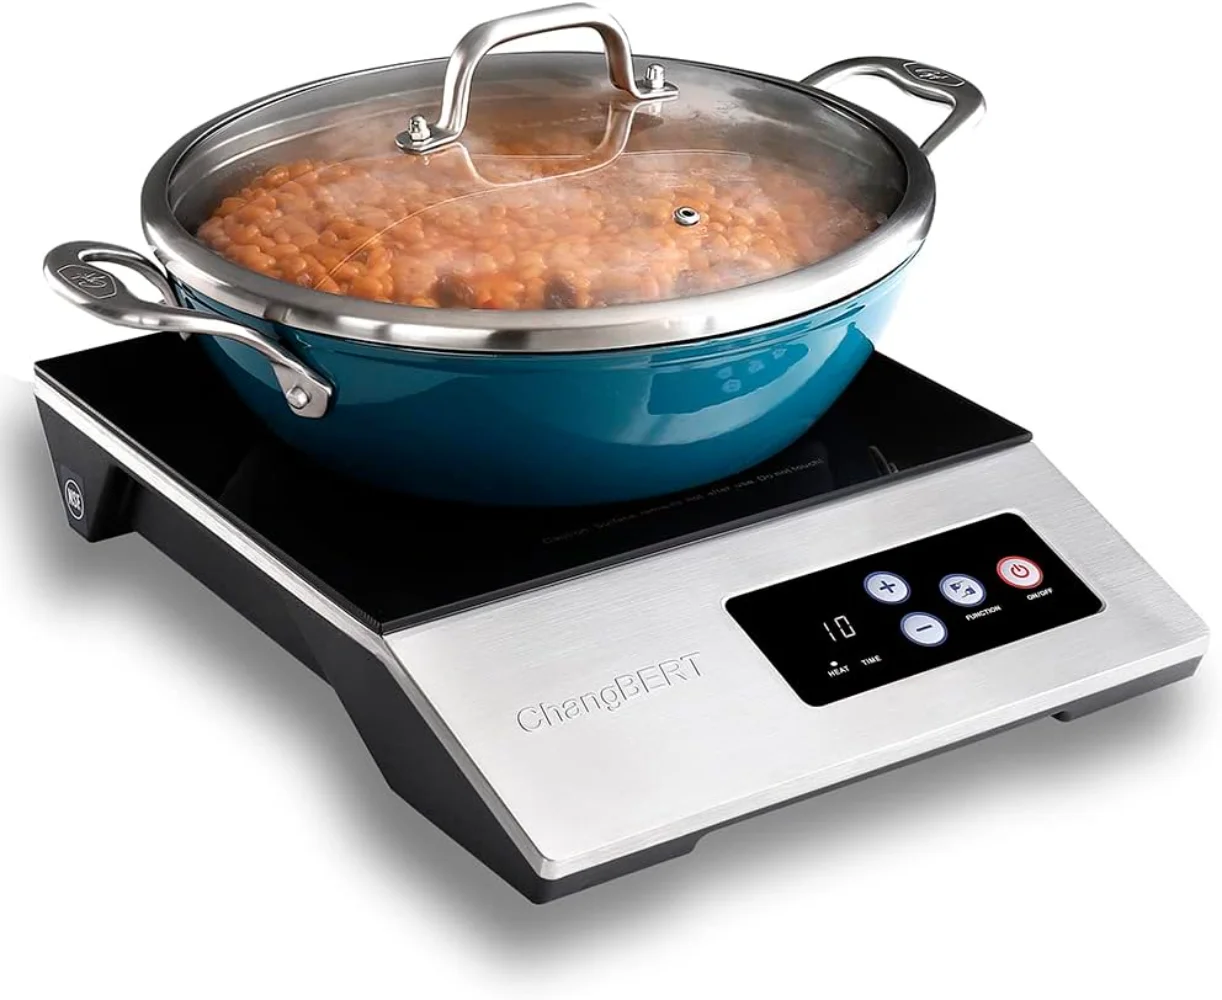 

ChangBERT 1800W Induction Cooktop, Portable, Large 8” Heating Coil, Cooking Surface, Induction Cookers